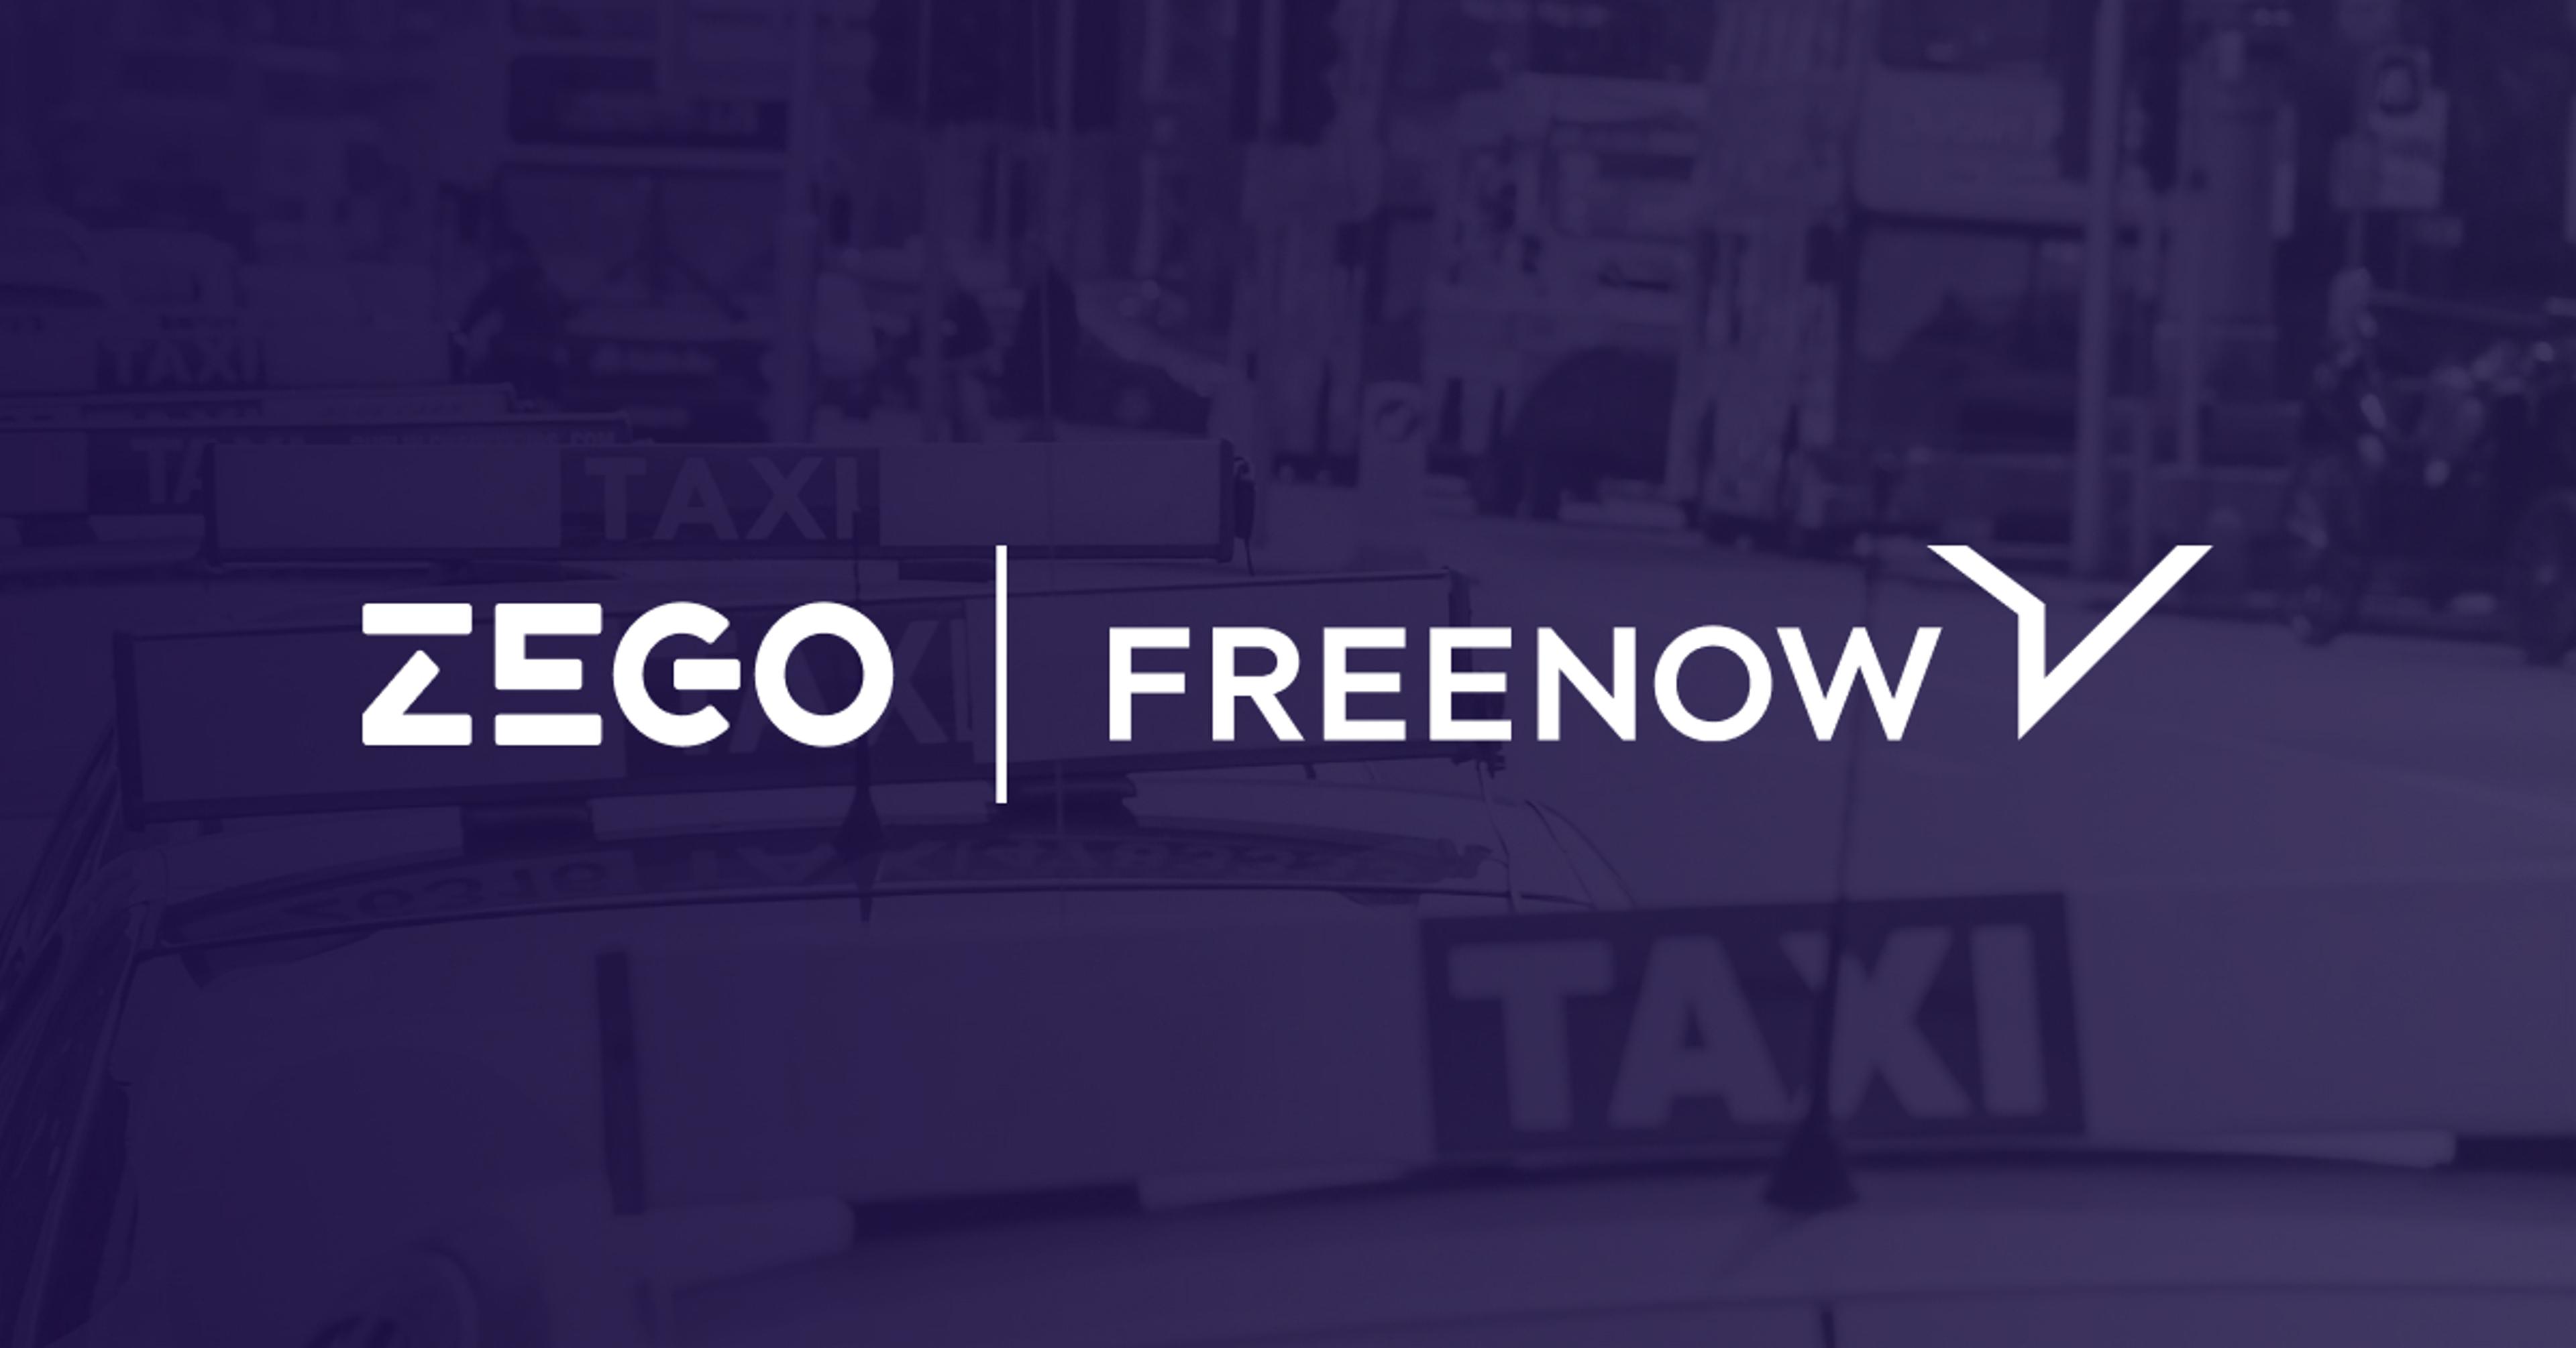 Zego partners with FREE NOW to disrupt Ireland’s taxi insurance market